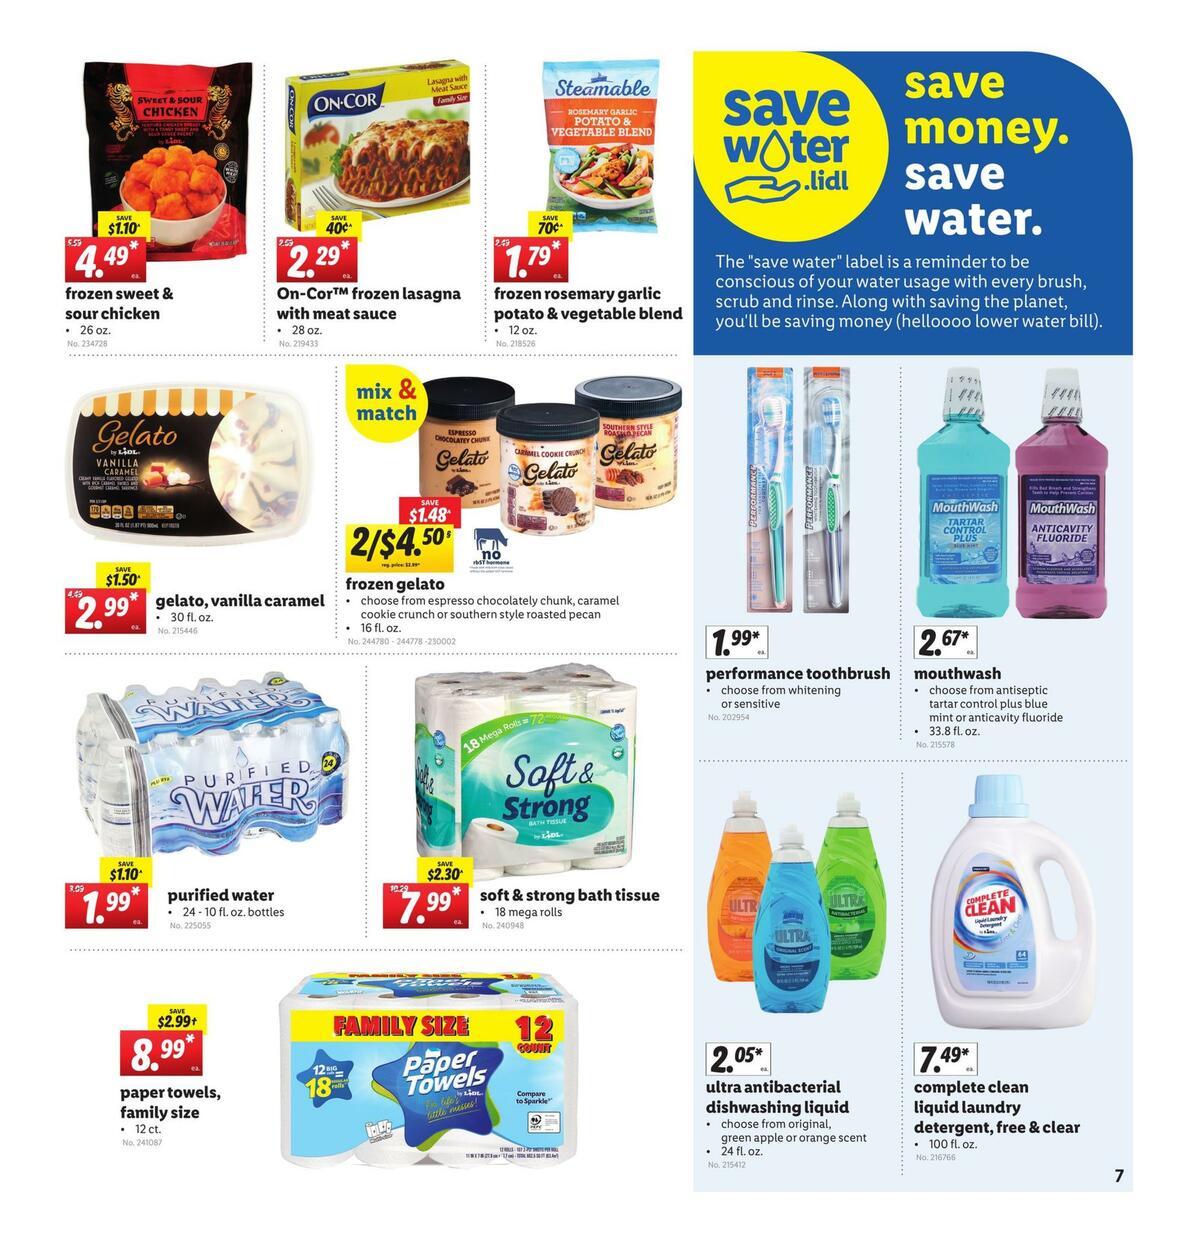 LIDL Weekly Ad from April 14